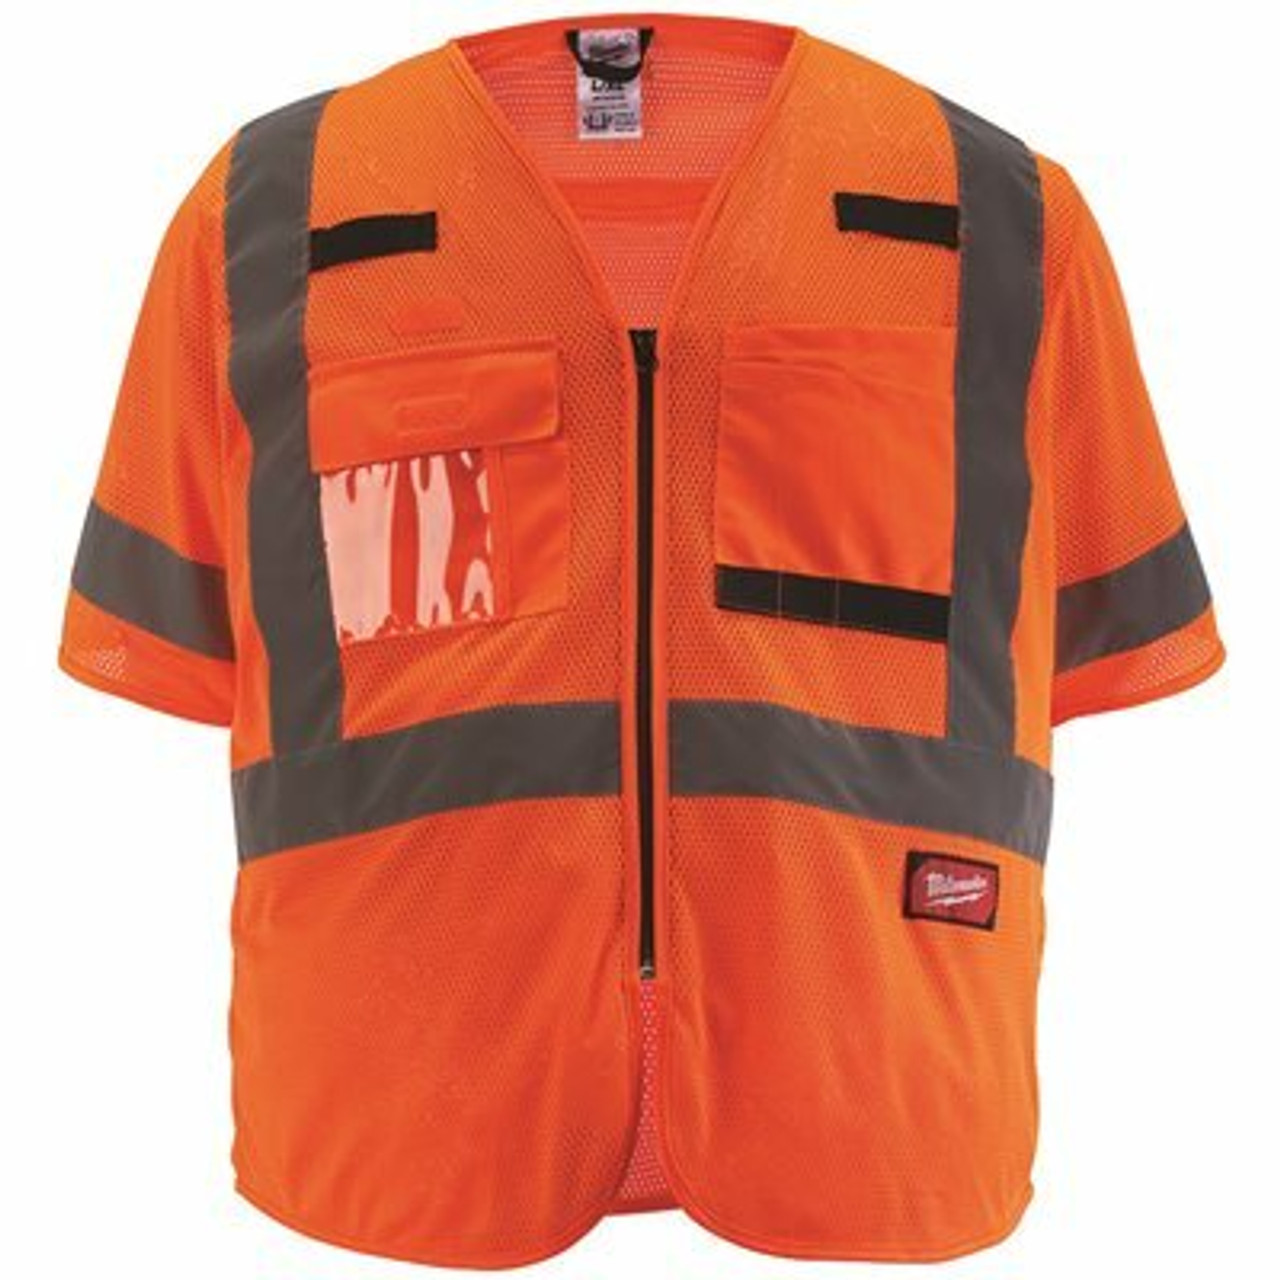 Milwaukee Small/Medium Orange Class 3 Mesh High Visibility Safety Vest With 9-Pockets And Sleeves